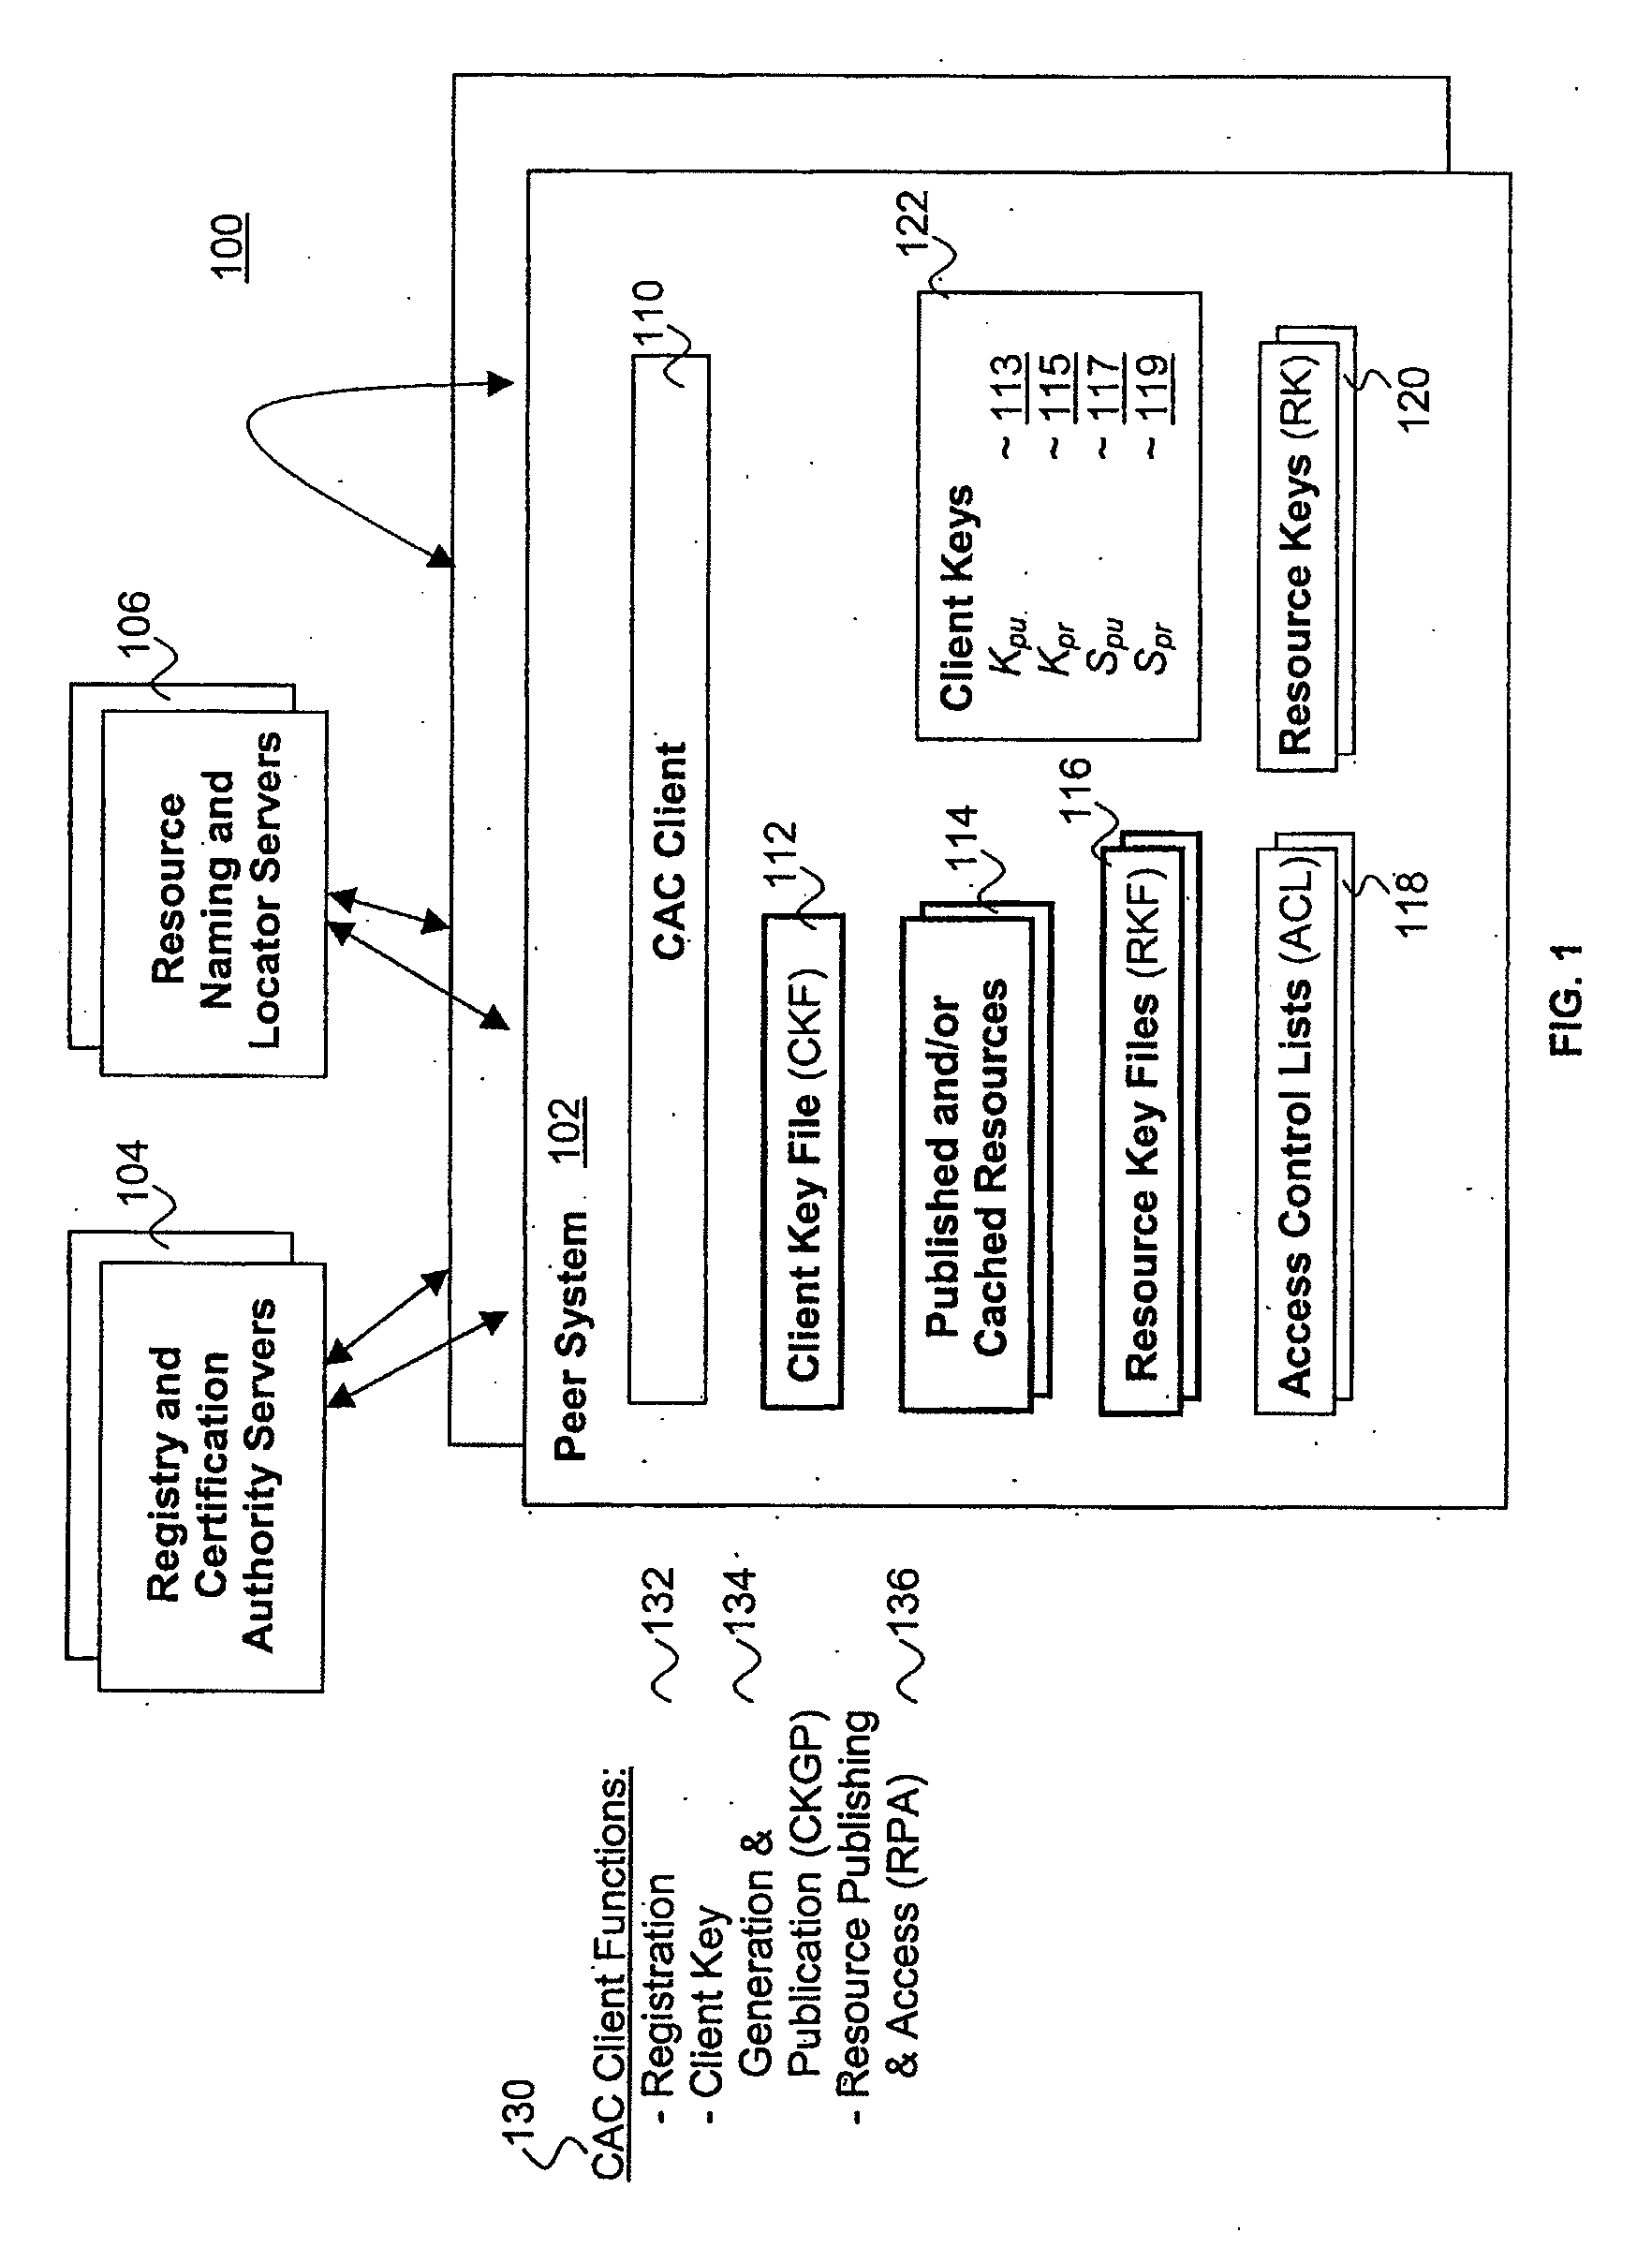 Distributed scalable cryptographic access control